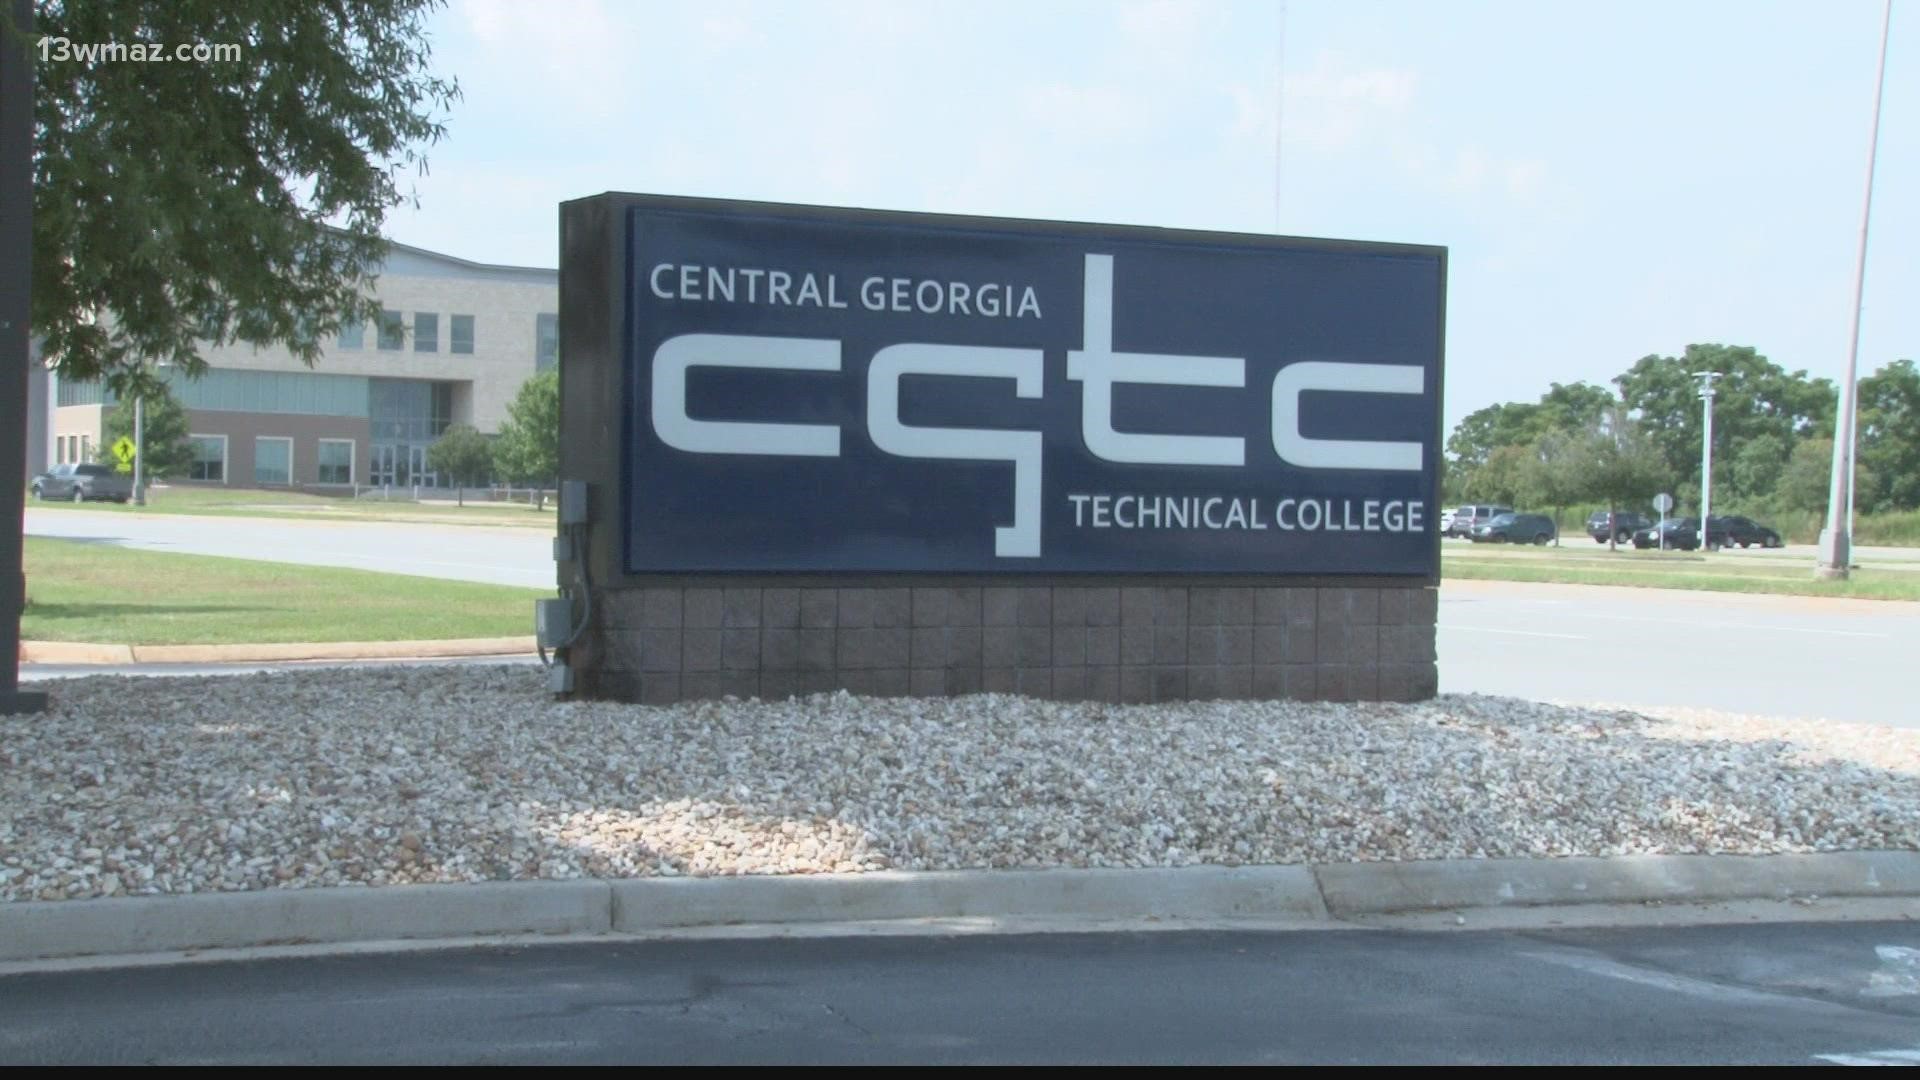 Central Georgia Technical College is one of three Georgia colleges that offers the second chance Pell Grant to get a degree